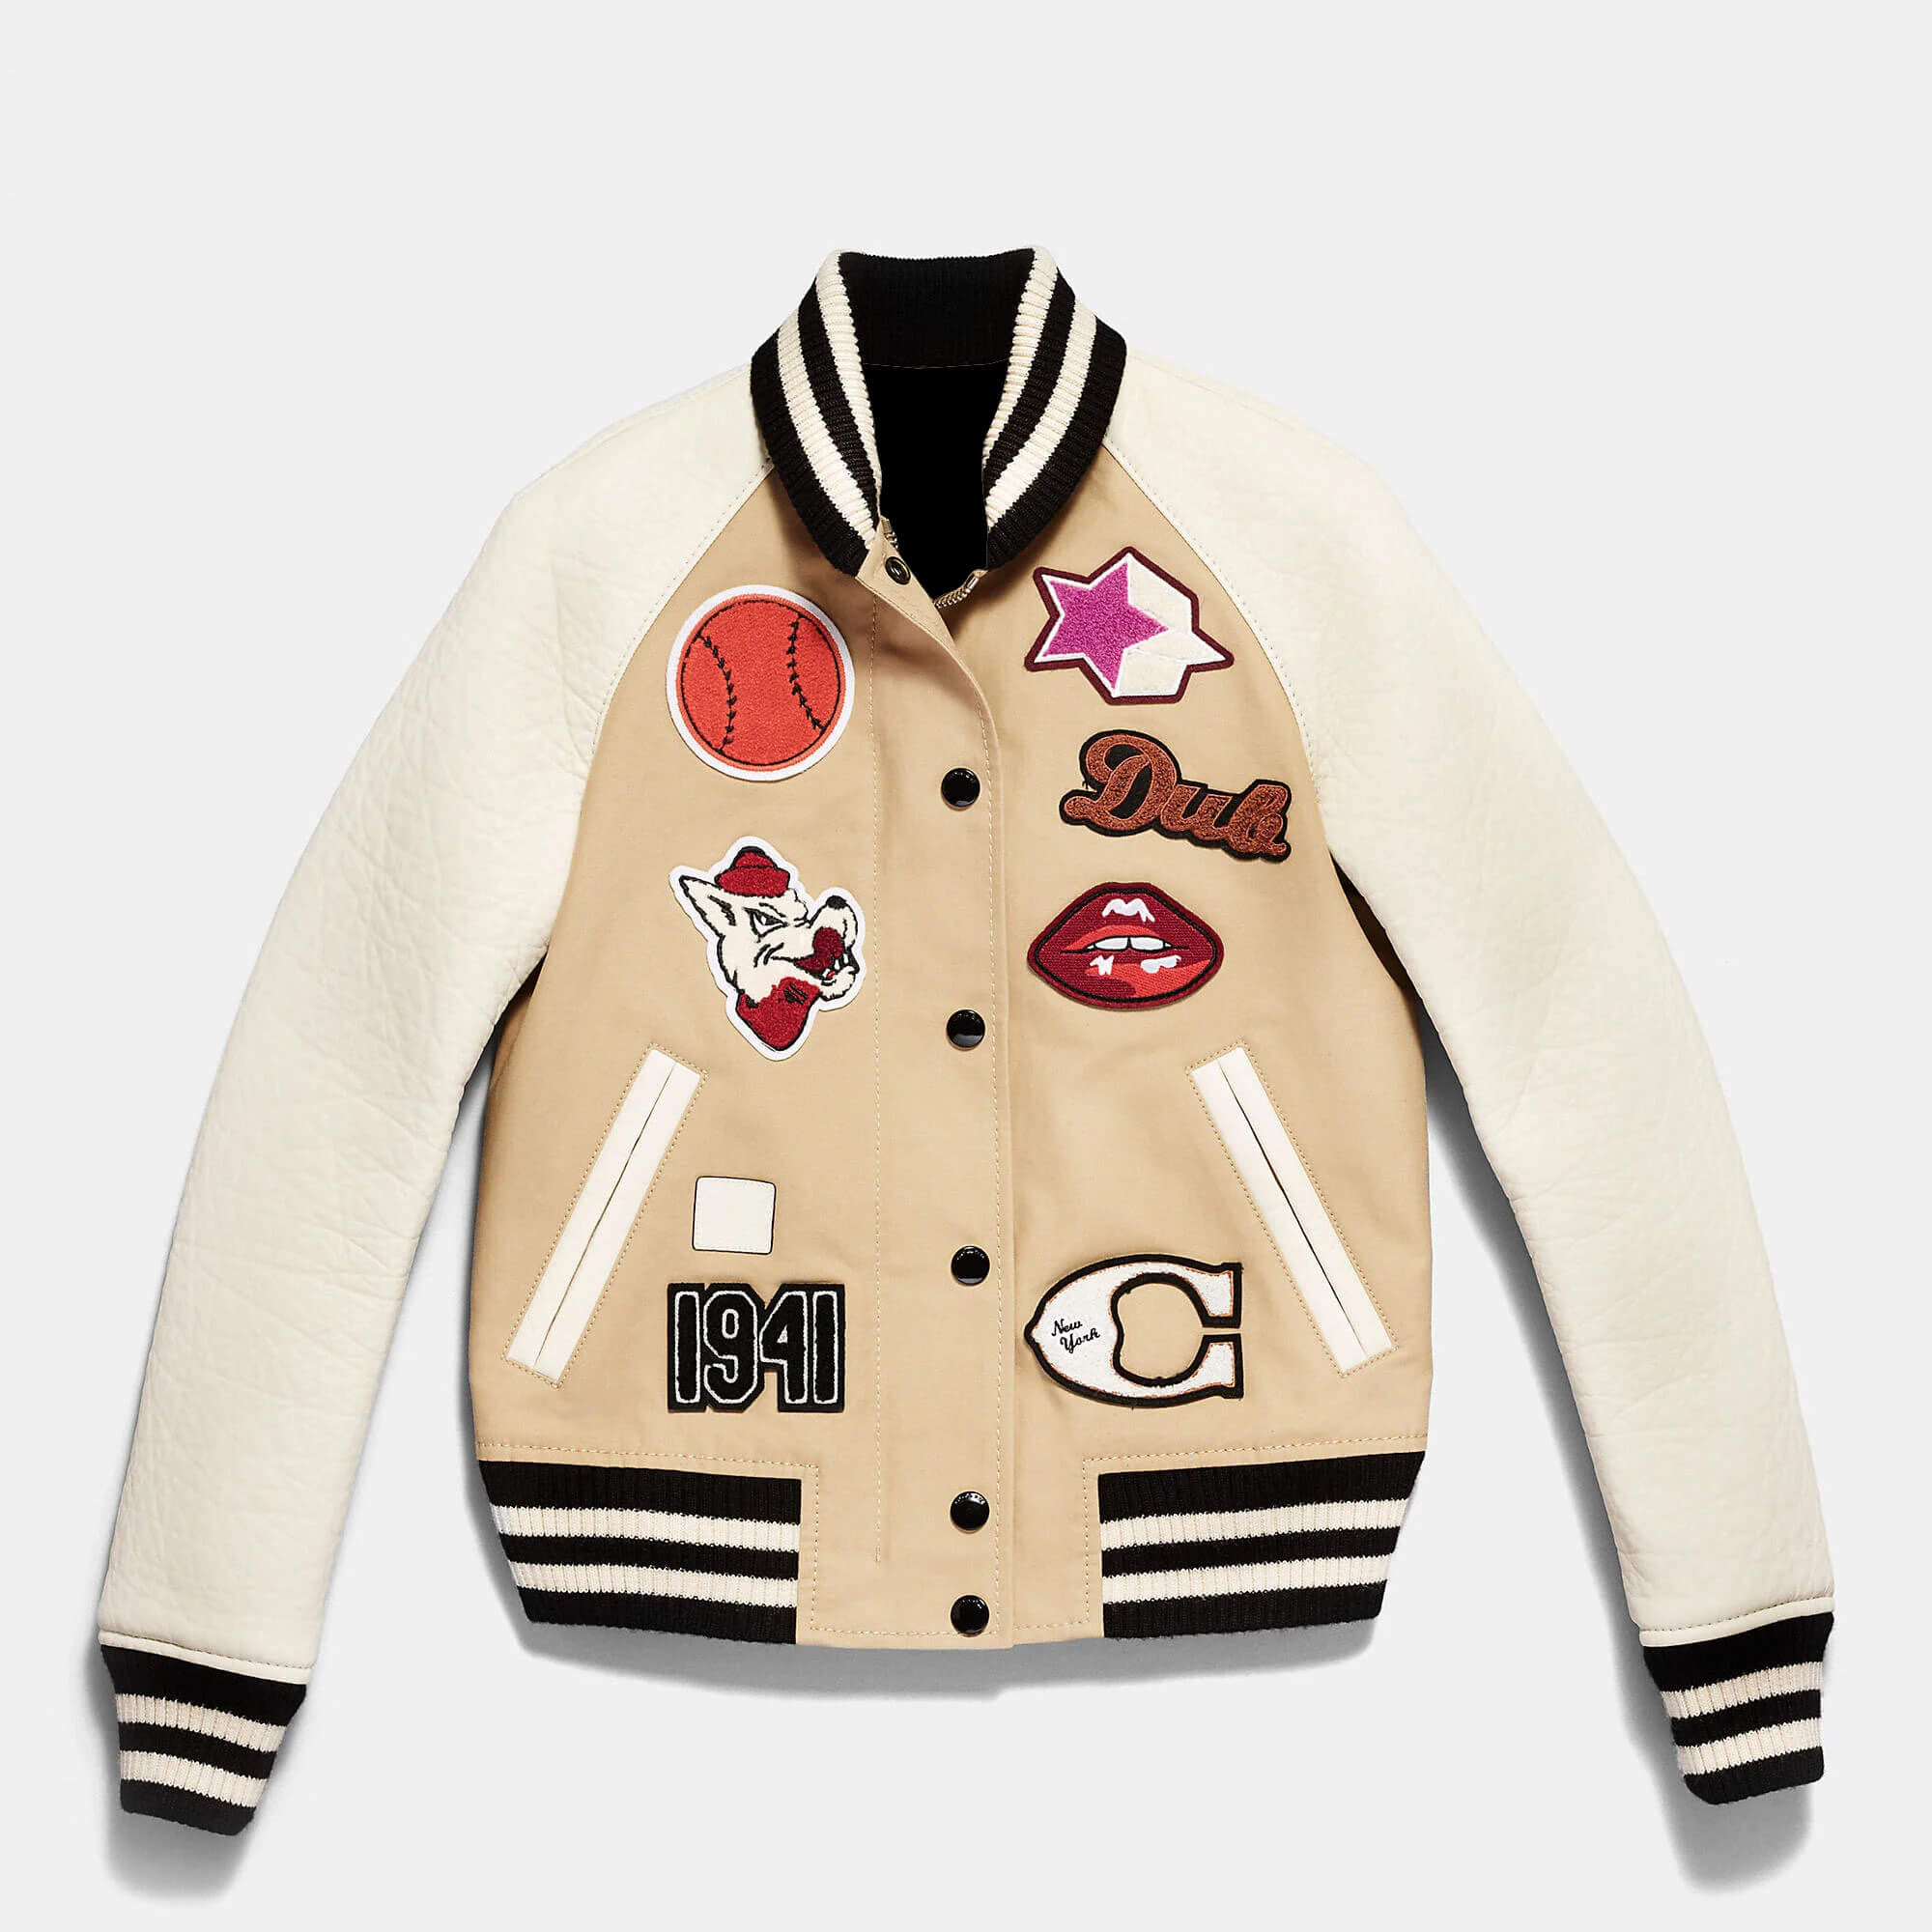 Buying Guide for the Perfect Varsity Jacket